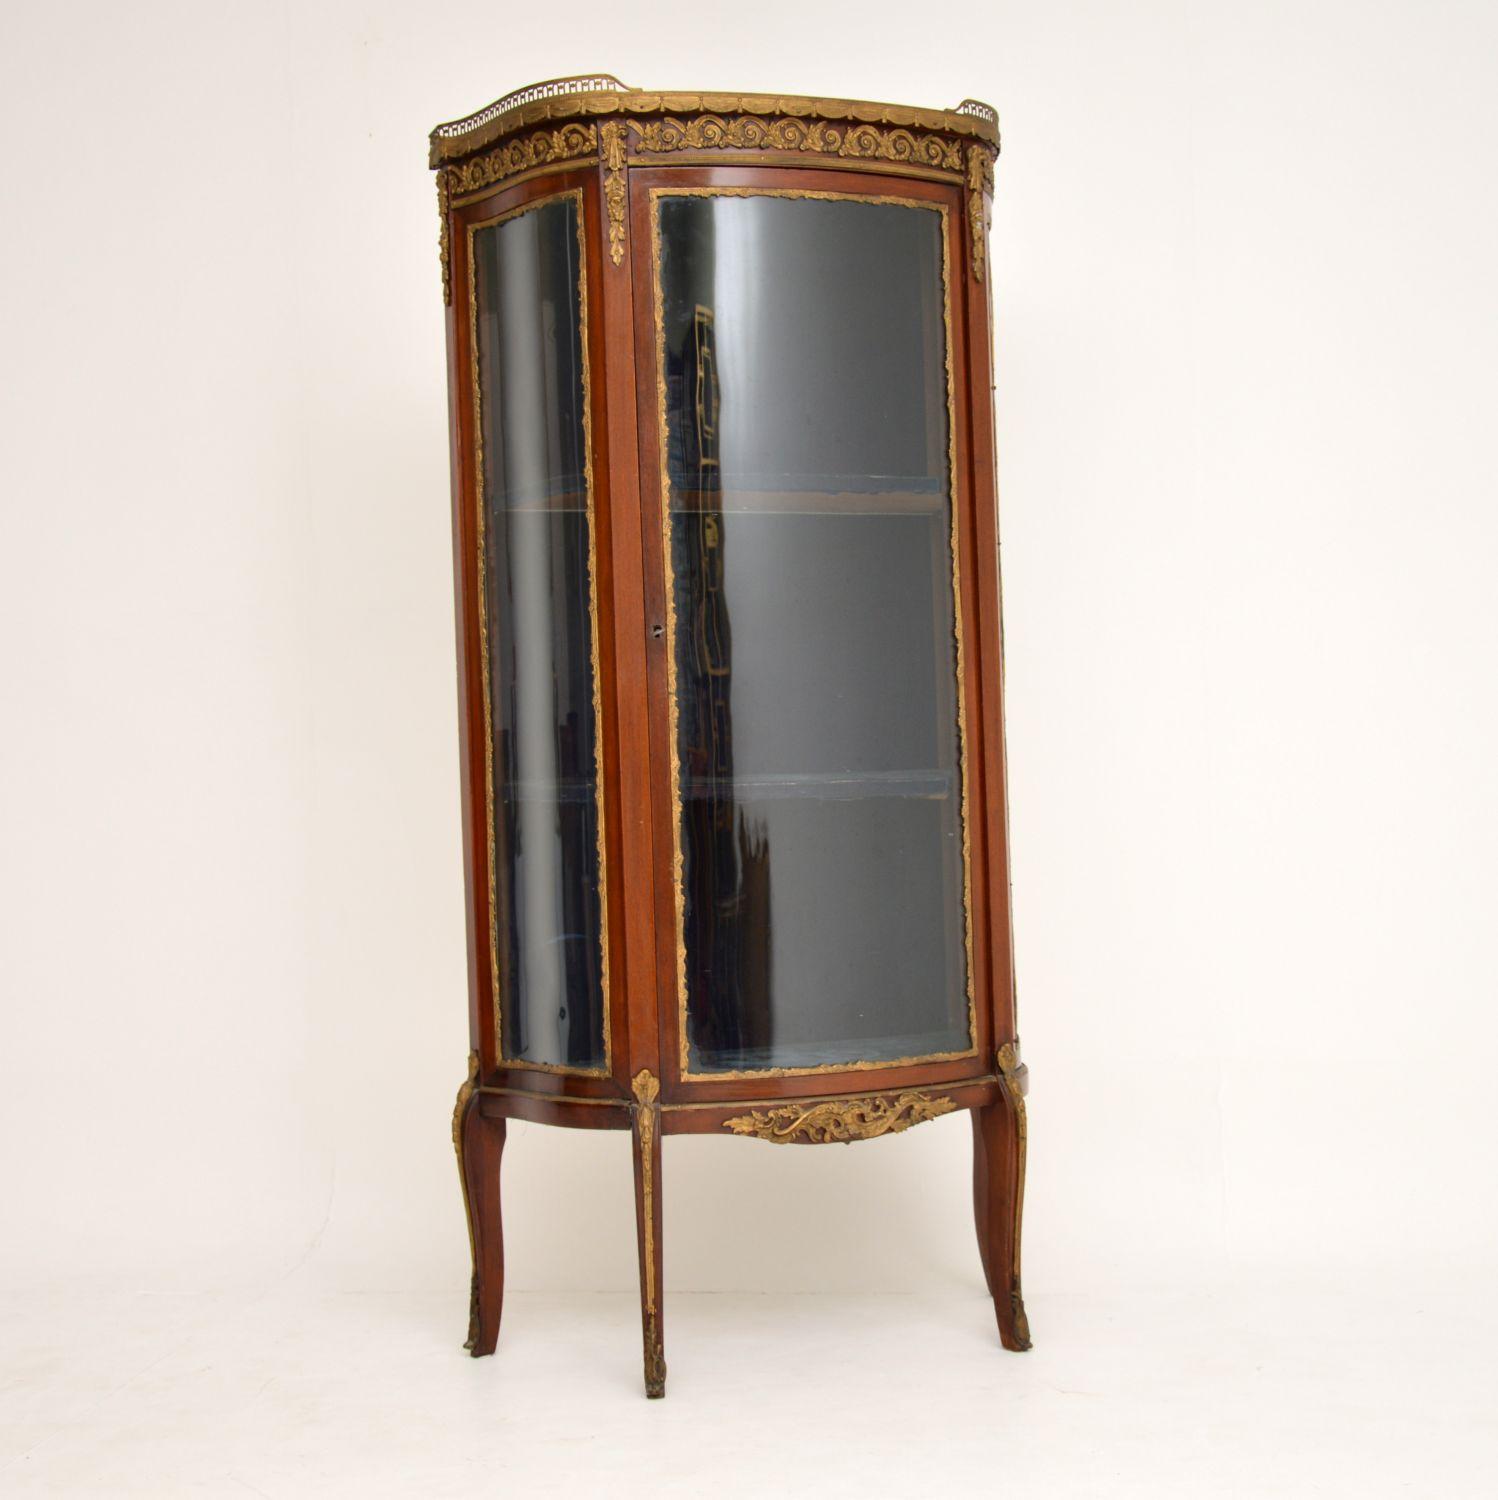 French antique Louis XV style display cabinet dating from around the 1880-90’s period & in very good original condition.

It has a marble top with a gilt metal pierced gallery with swags below. There are gilt bronze mounts on the top, on & between